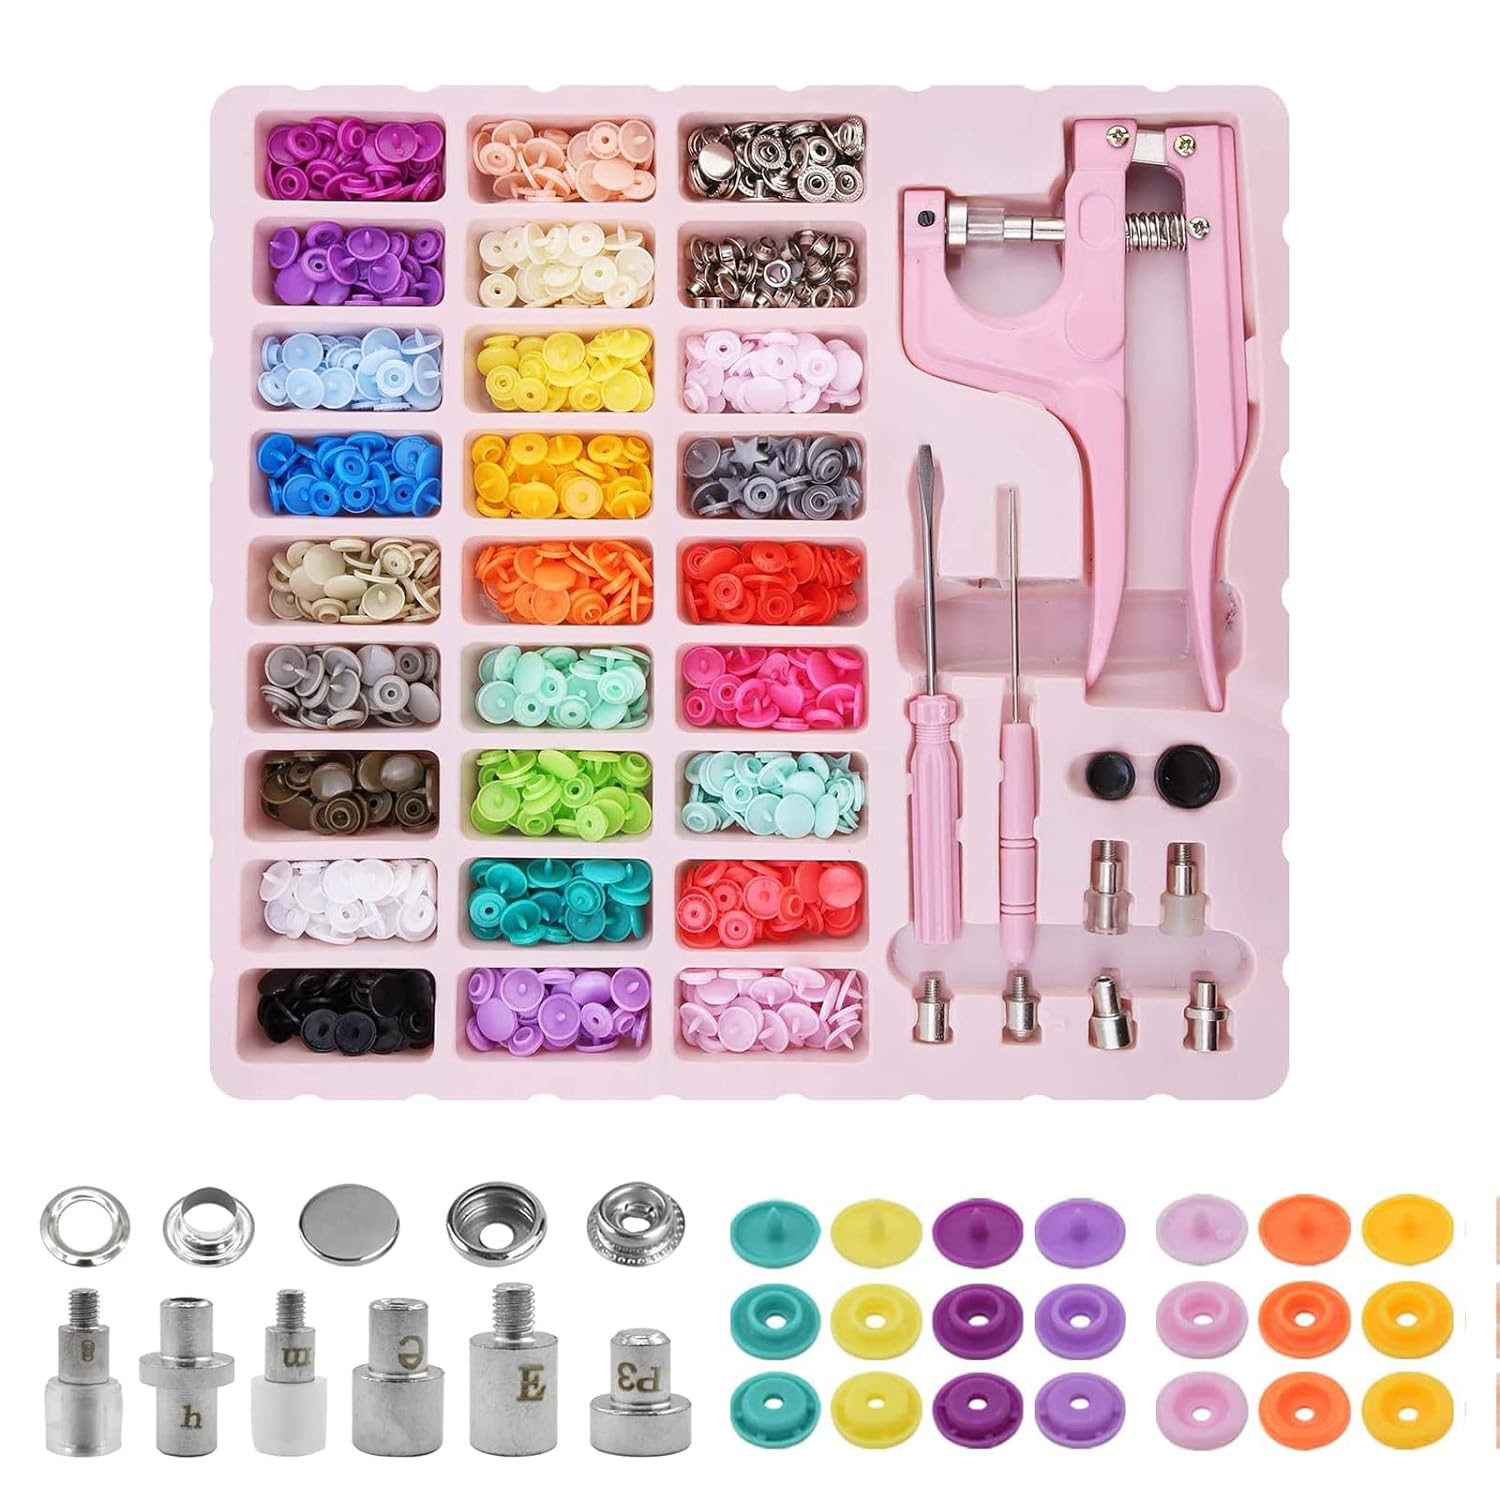 Great Choice Products 300 Sets Snap Buttons And Snap Pliers, T5 Plastic Metal Snap Fasteners, Colorful Starter Fasteners Kit Resin Snaps No-Sew …